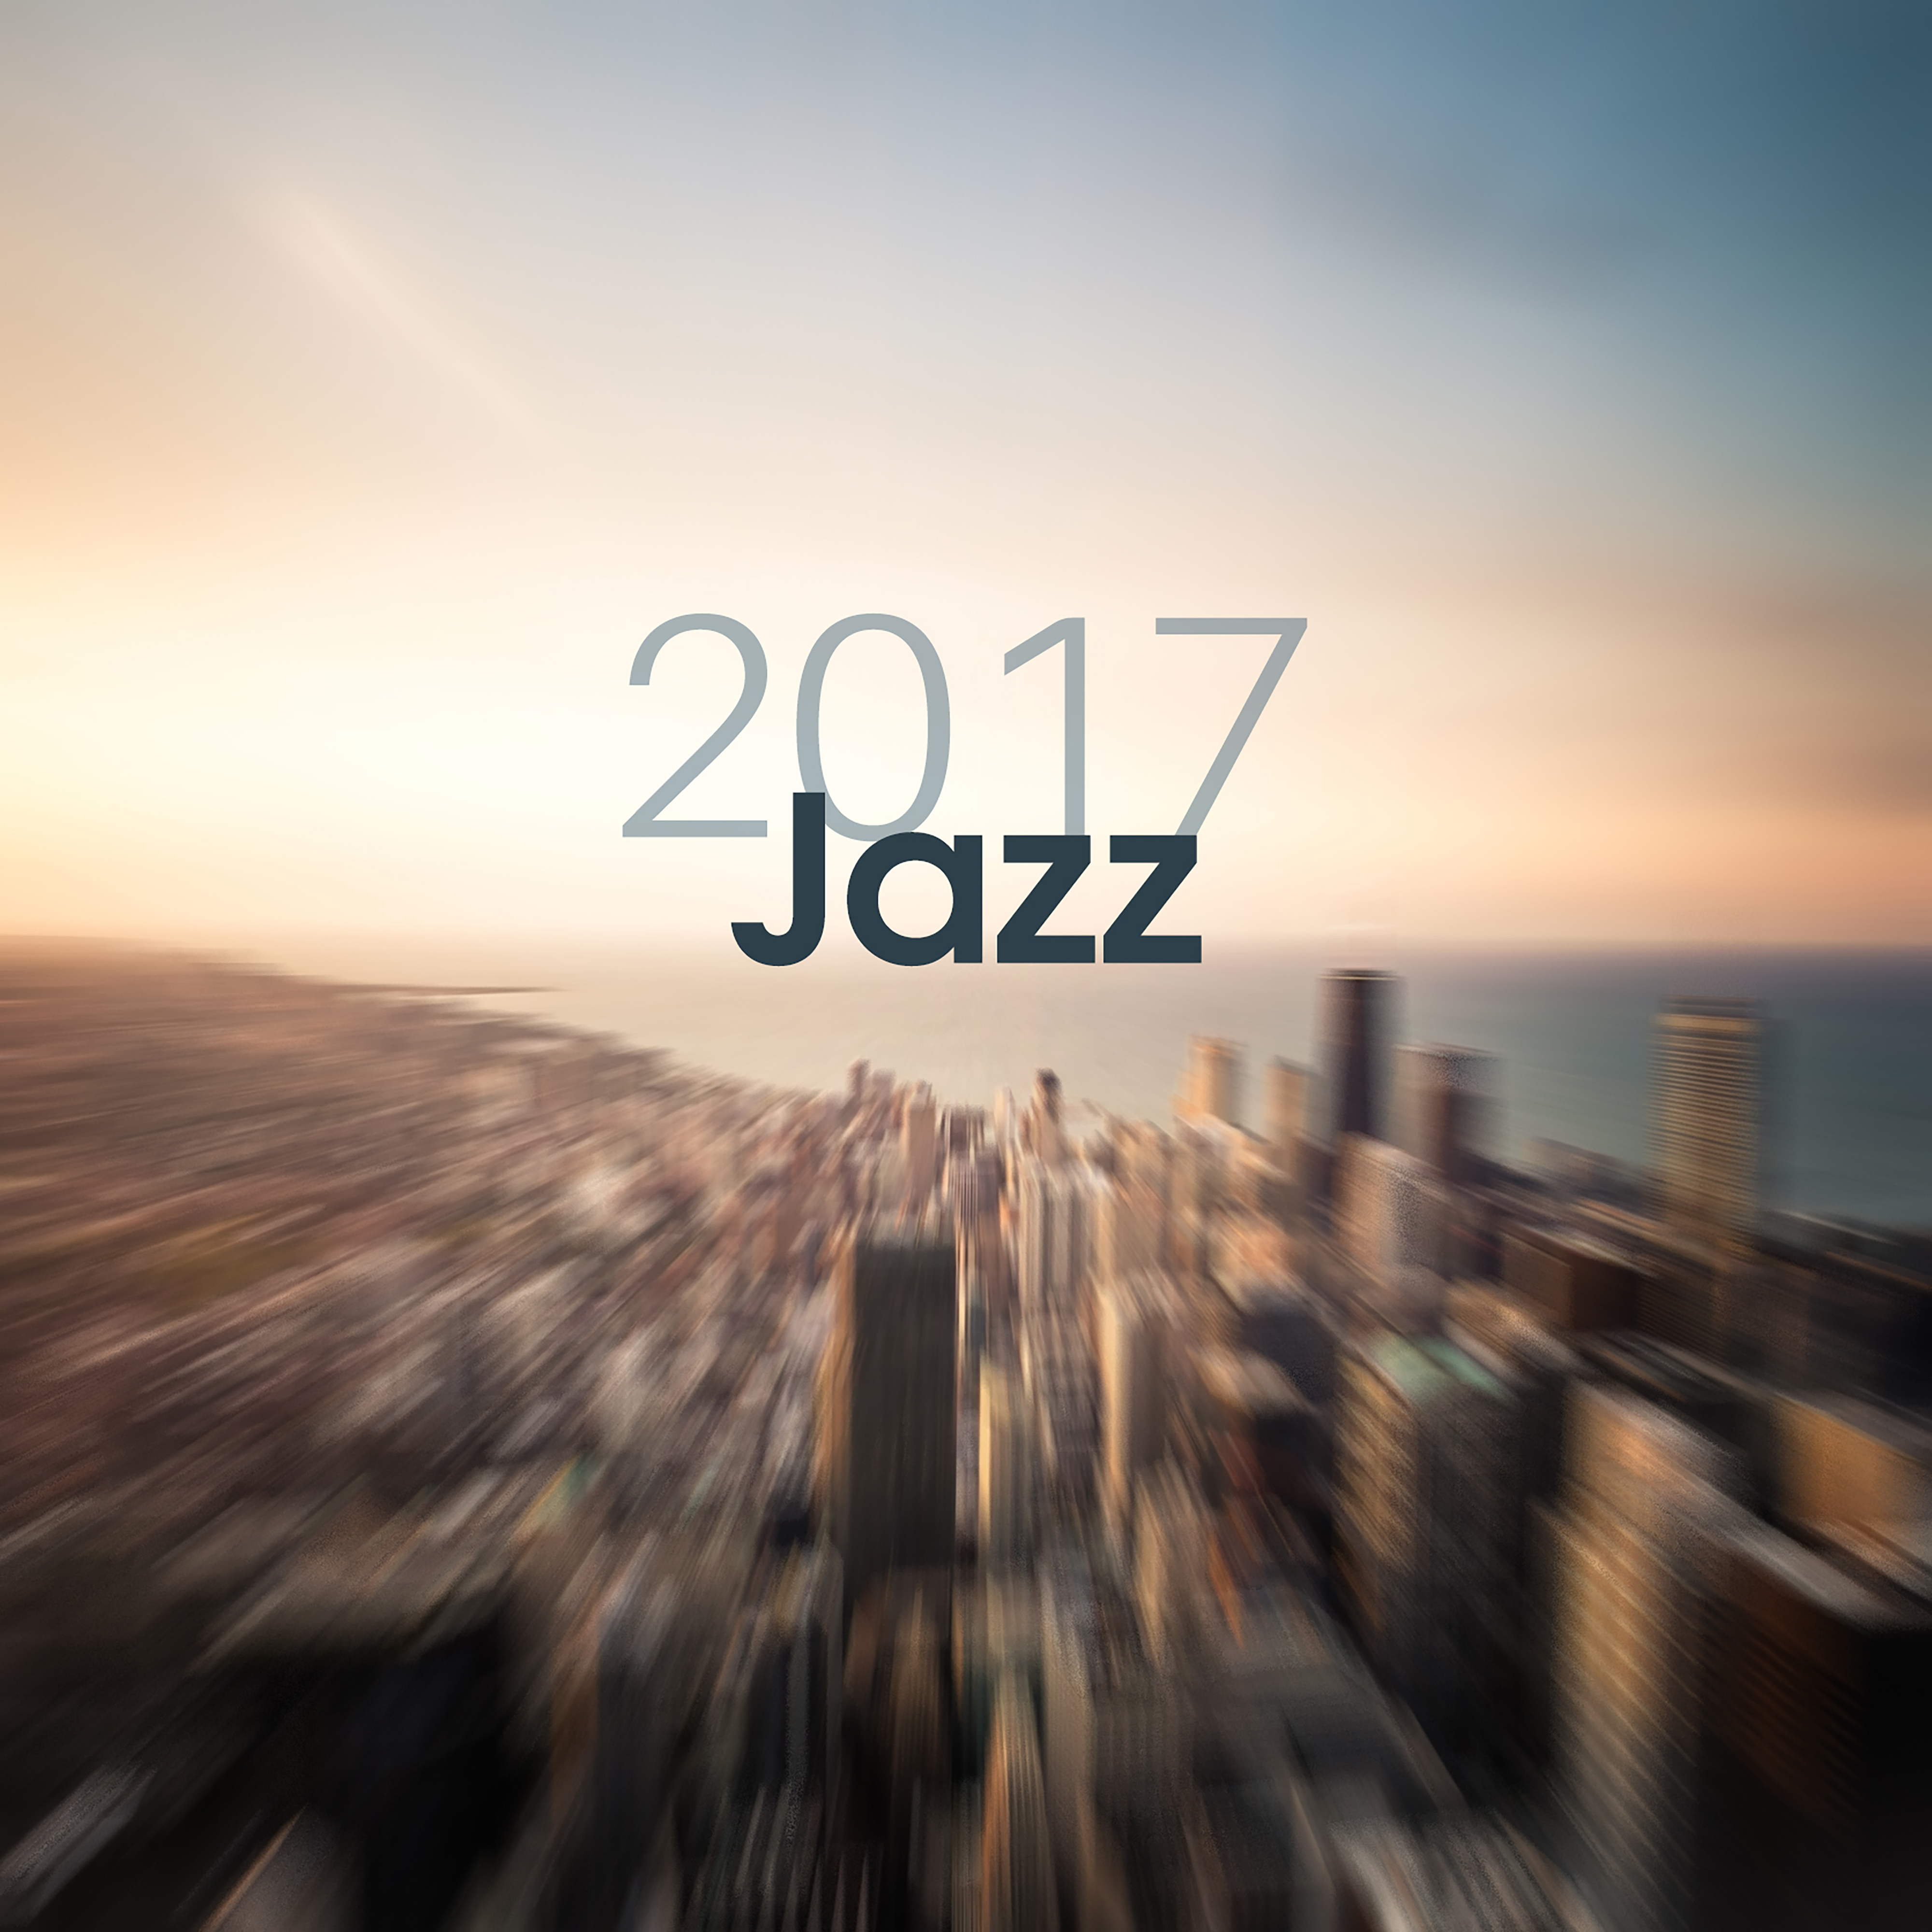 2017 Jazz – Instrumental Music, Ambient, Lounge, New Relaxed Jazz, Calm